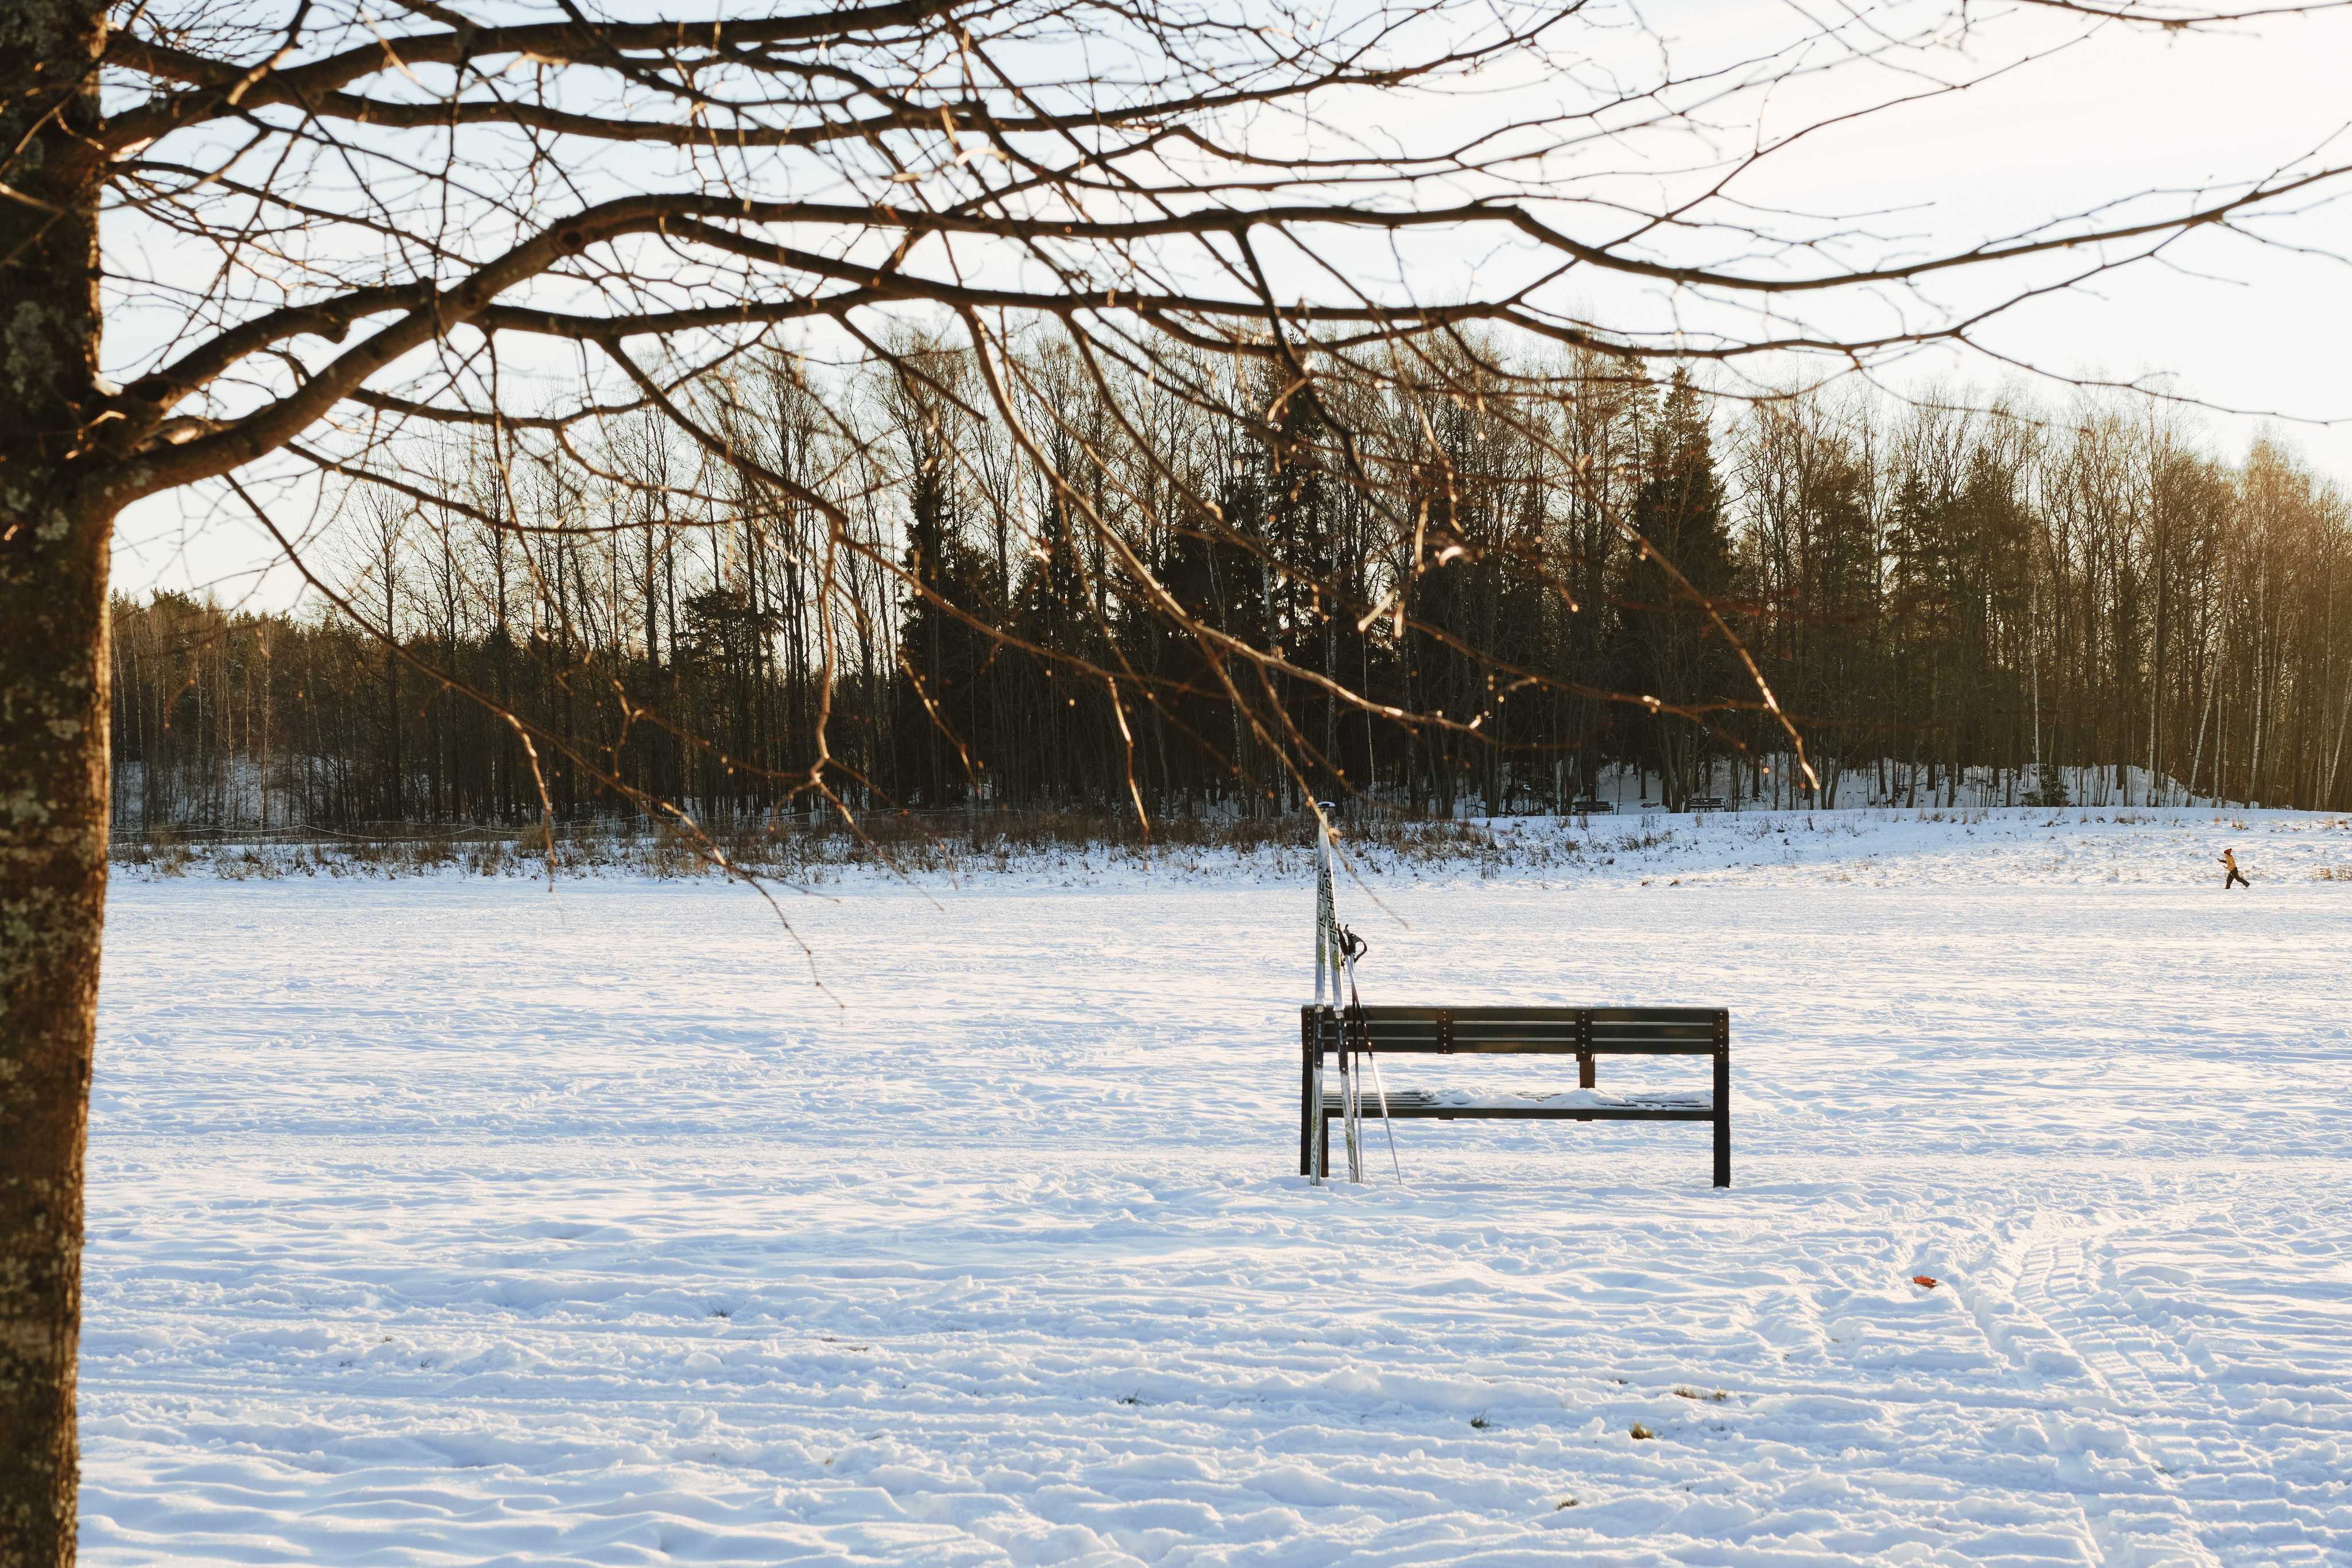 A winter scene with lots of snow, a park bench, and a pair of skis leaning on the bench.